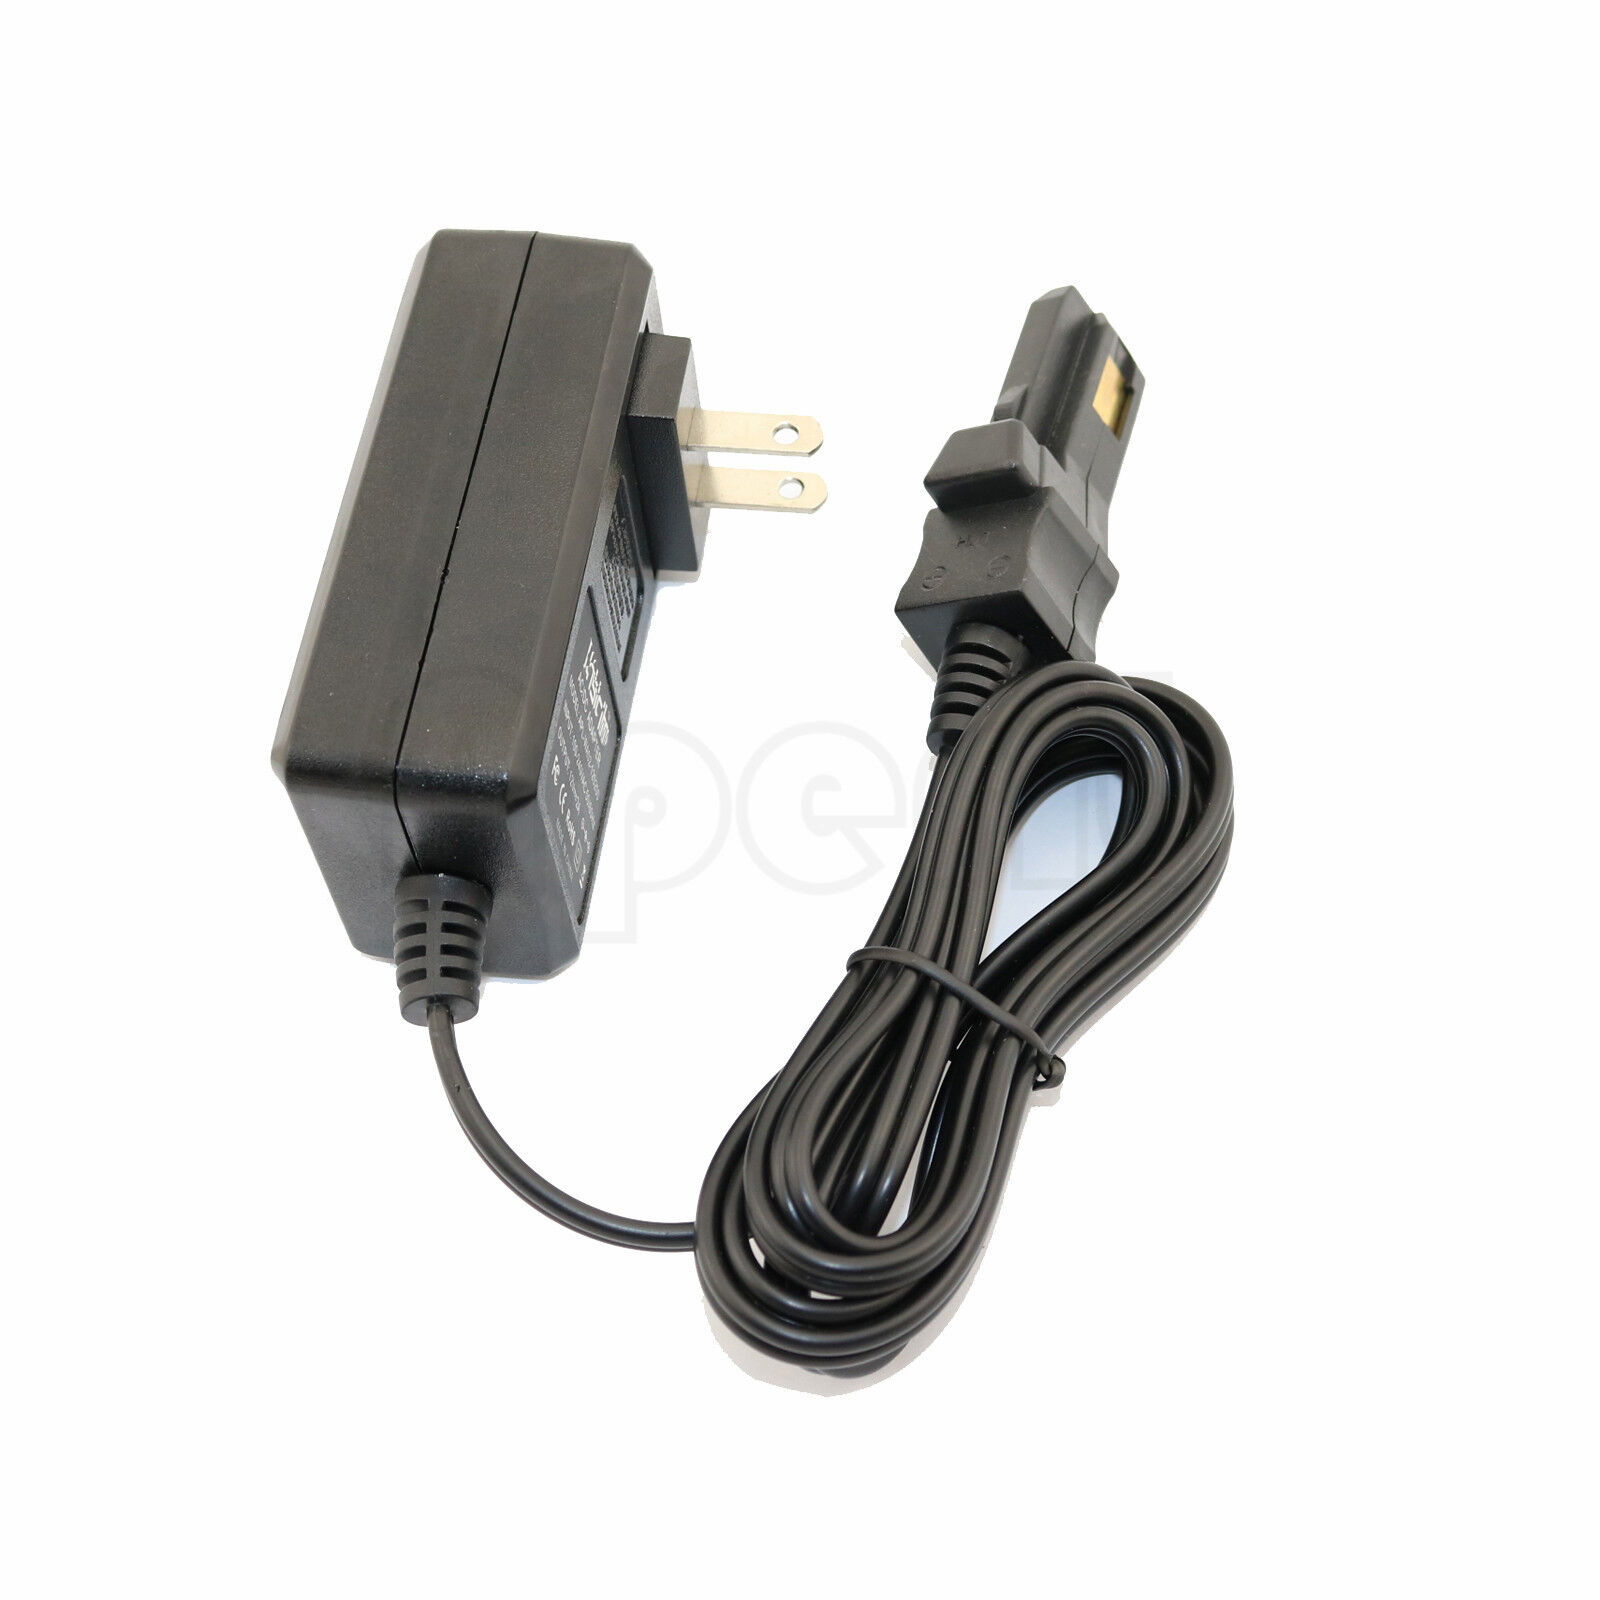 *Brand NEW* for Power Wheels P8812 Barbie Mustang Charger AC/DC Adapter Charger